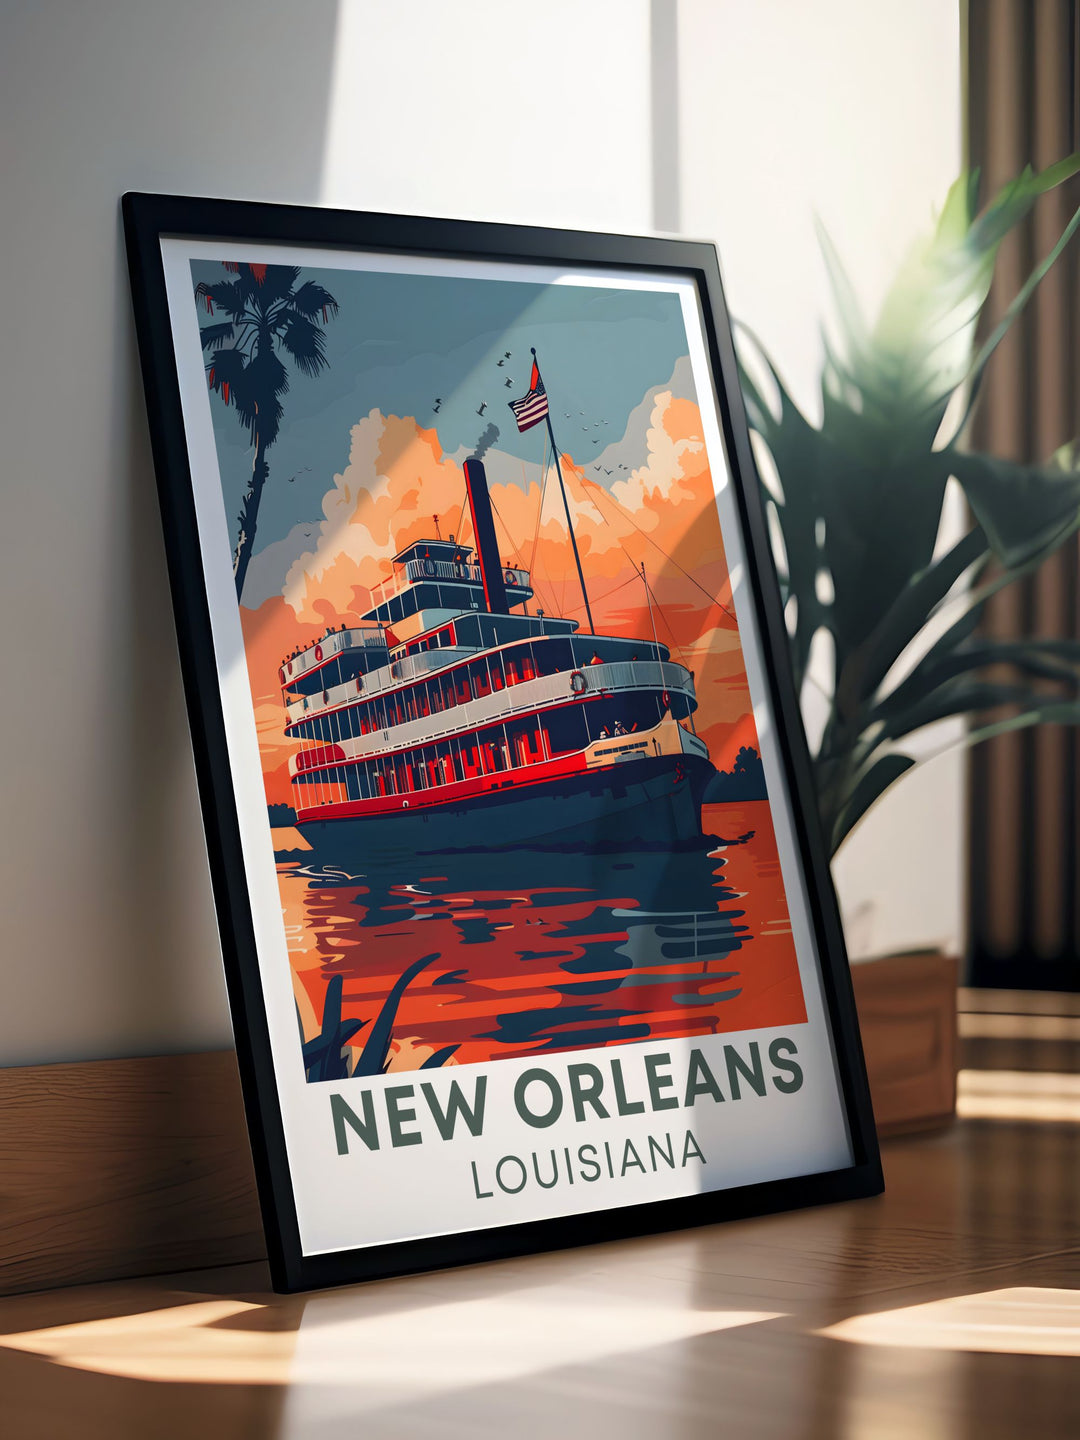 Beautiful Steamboat Natchez travel poster capturing the essence of New Orleans in rich colors perfect for adding a touch of Louisiana charm to your home decor or as a thoughtful gift for someone who loves this iconic city